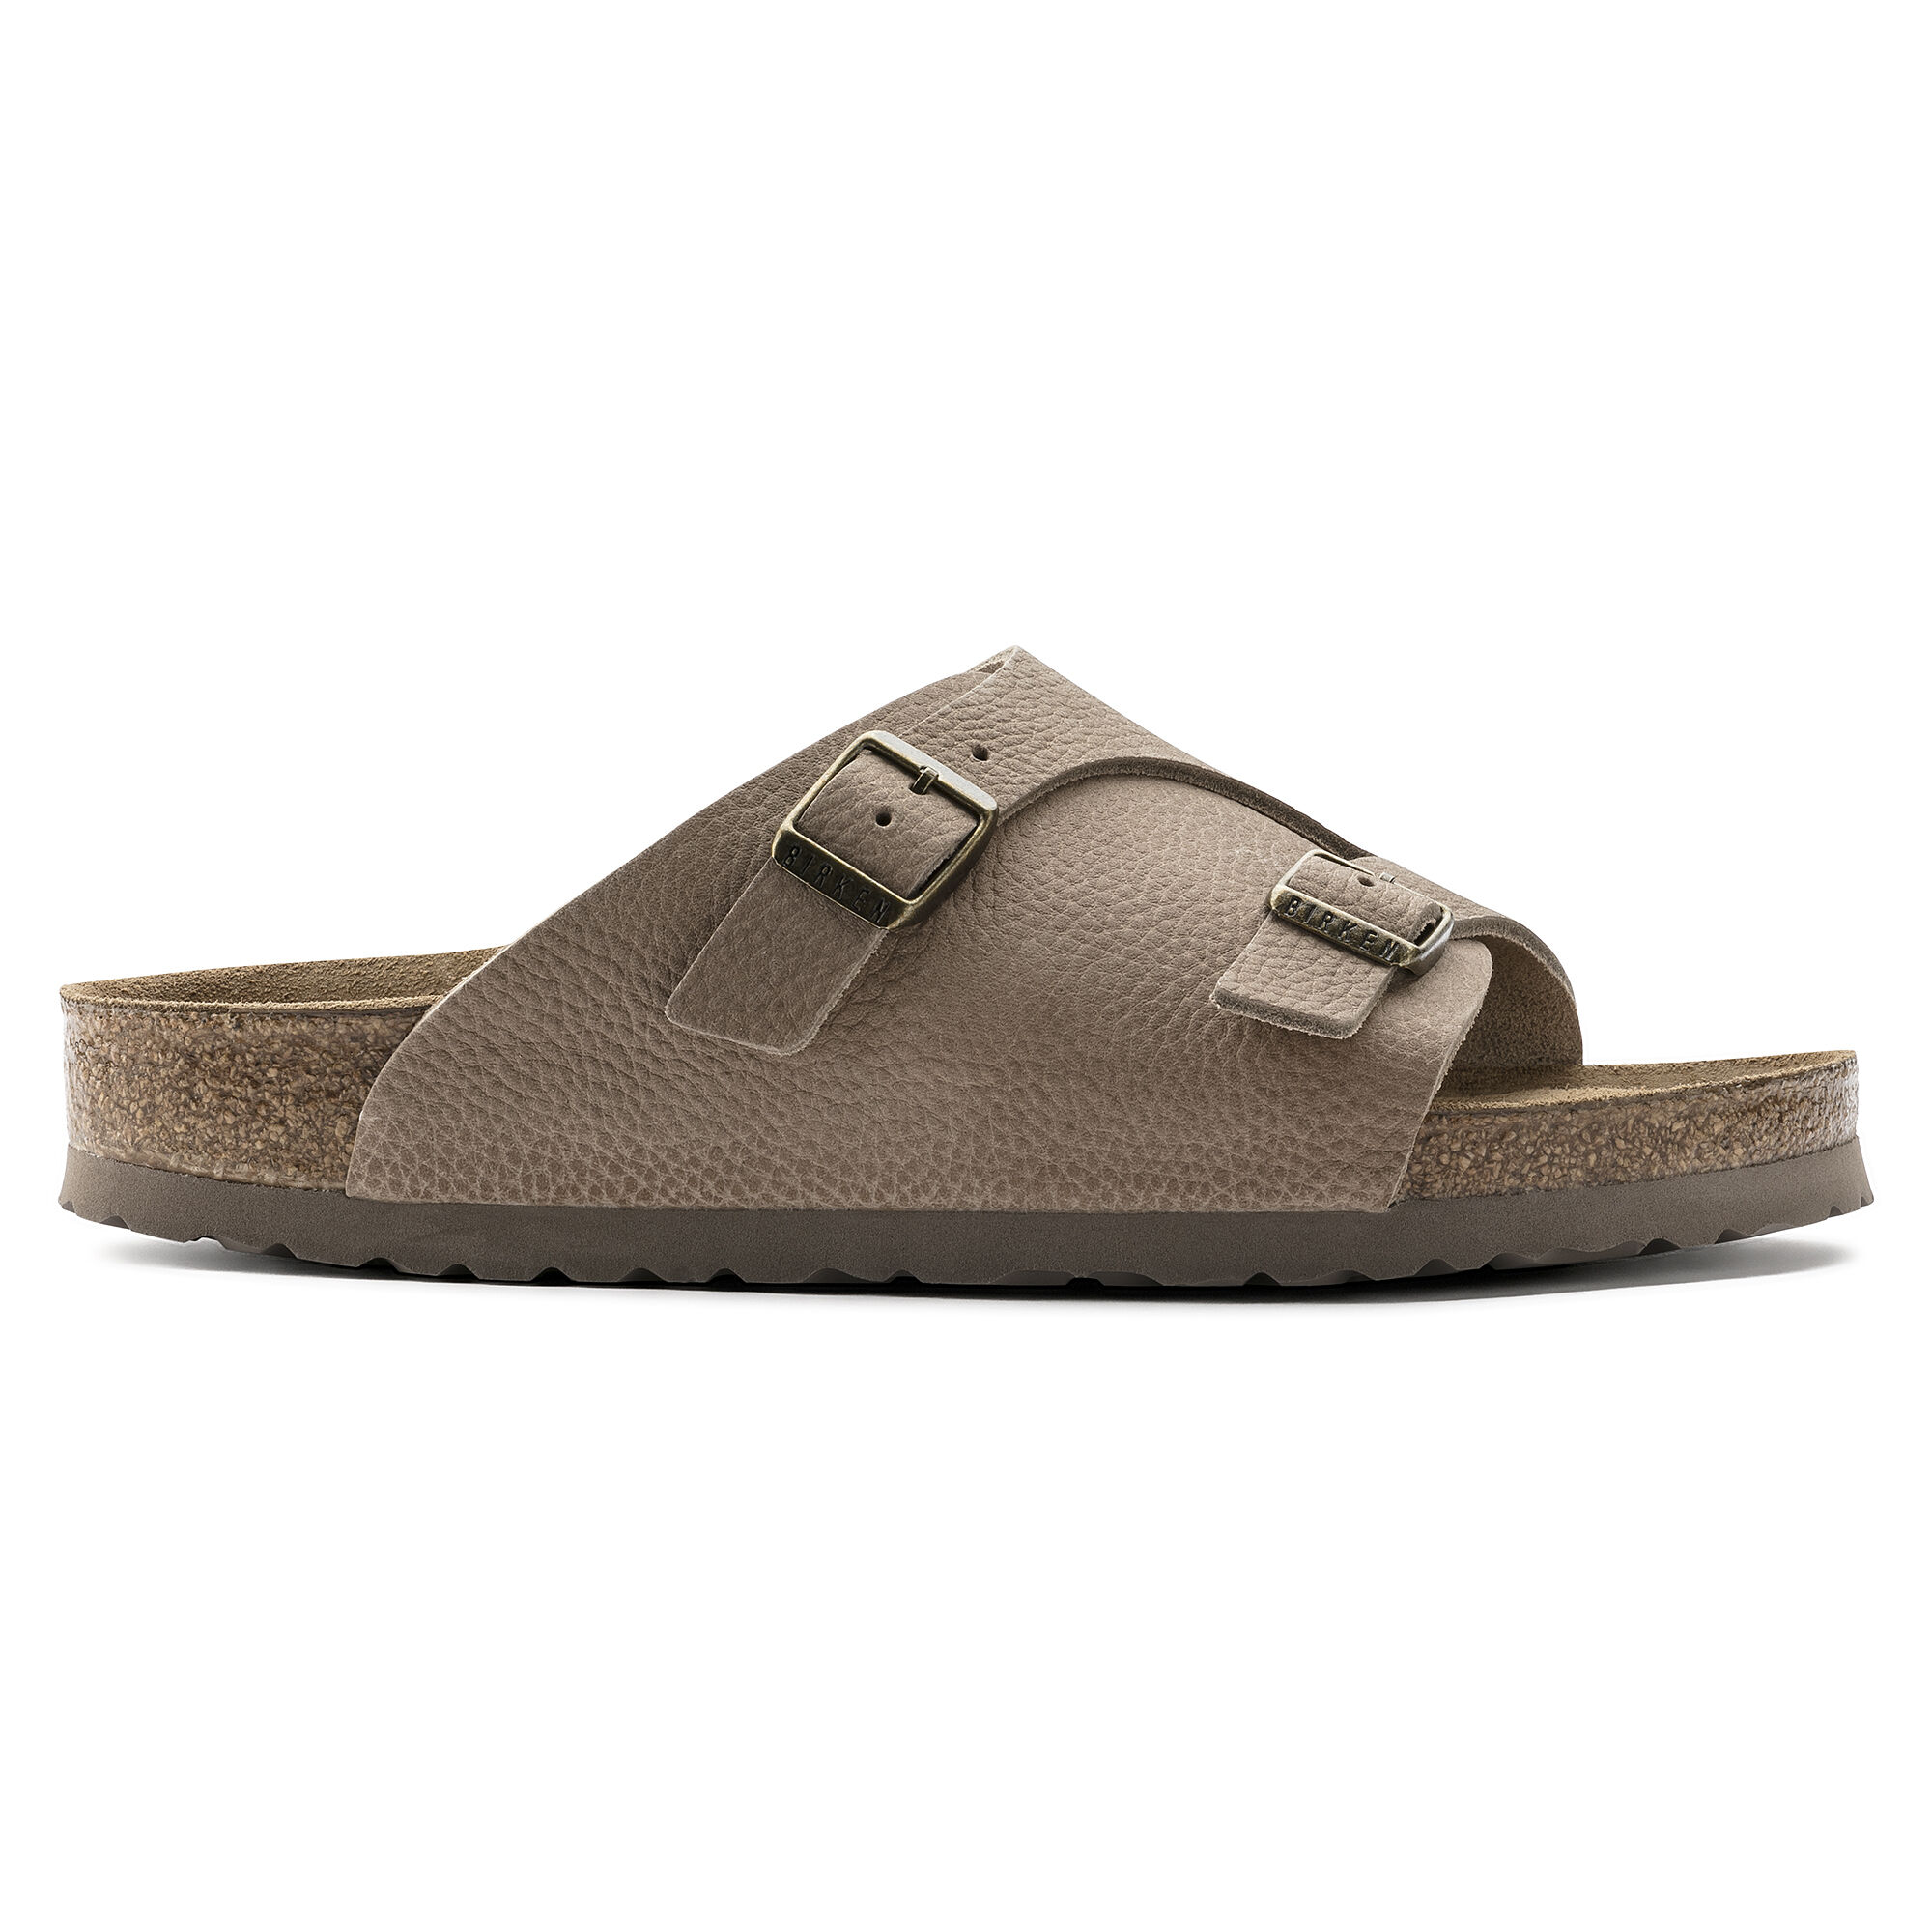 Zurich Soft Footbed / チューリッヒ ソフトフットベッド Real Leather 